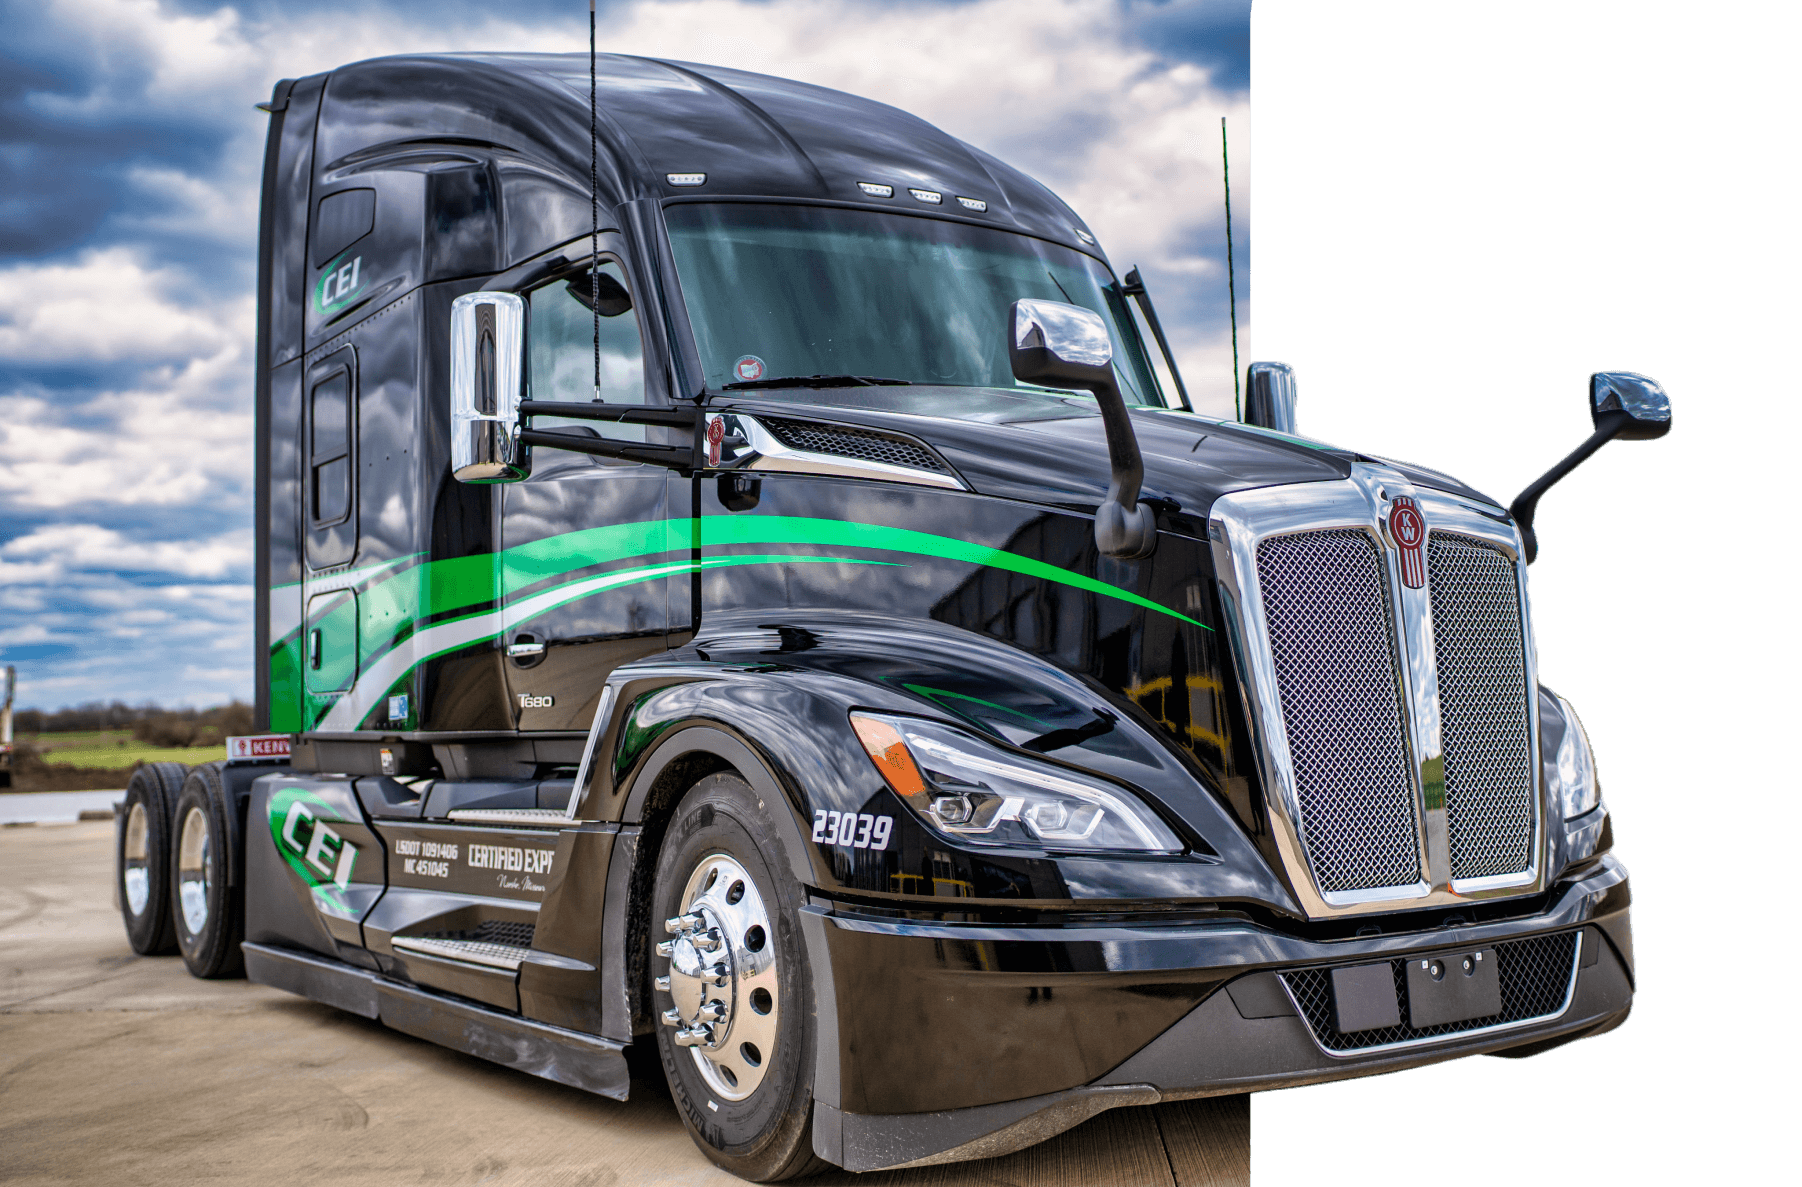 A gleaming black Certified Express truck is parked in front of a clear sky background.